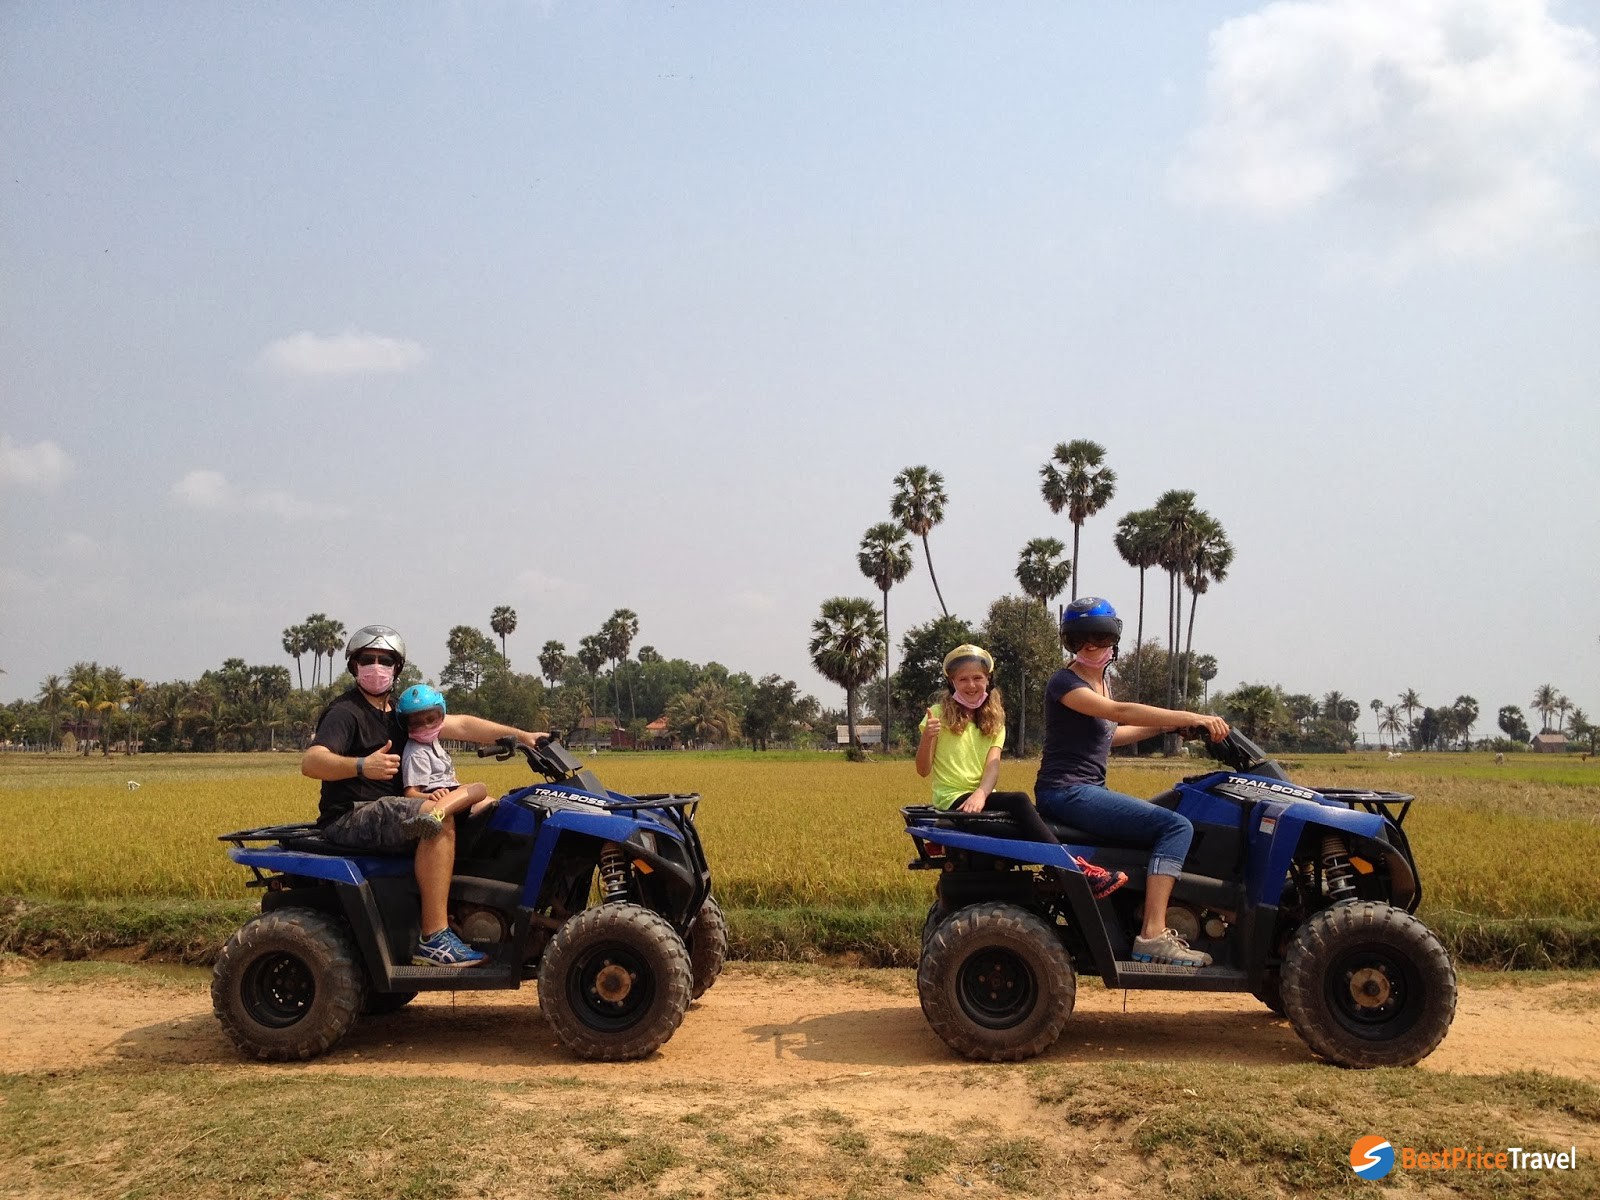 Explore countryside by Quad bike